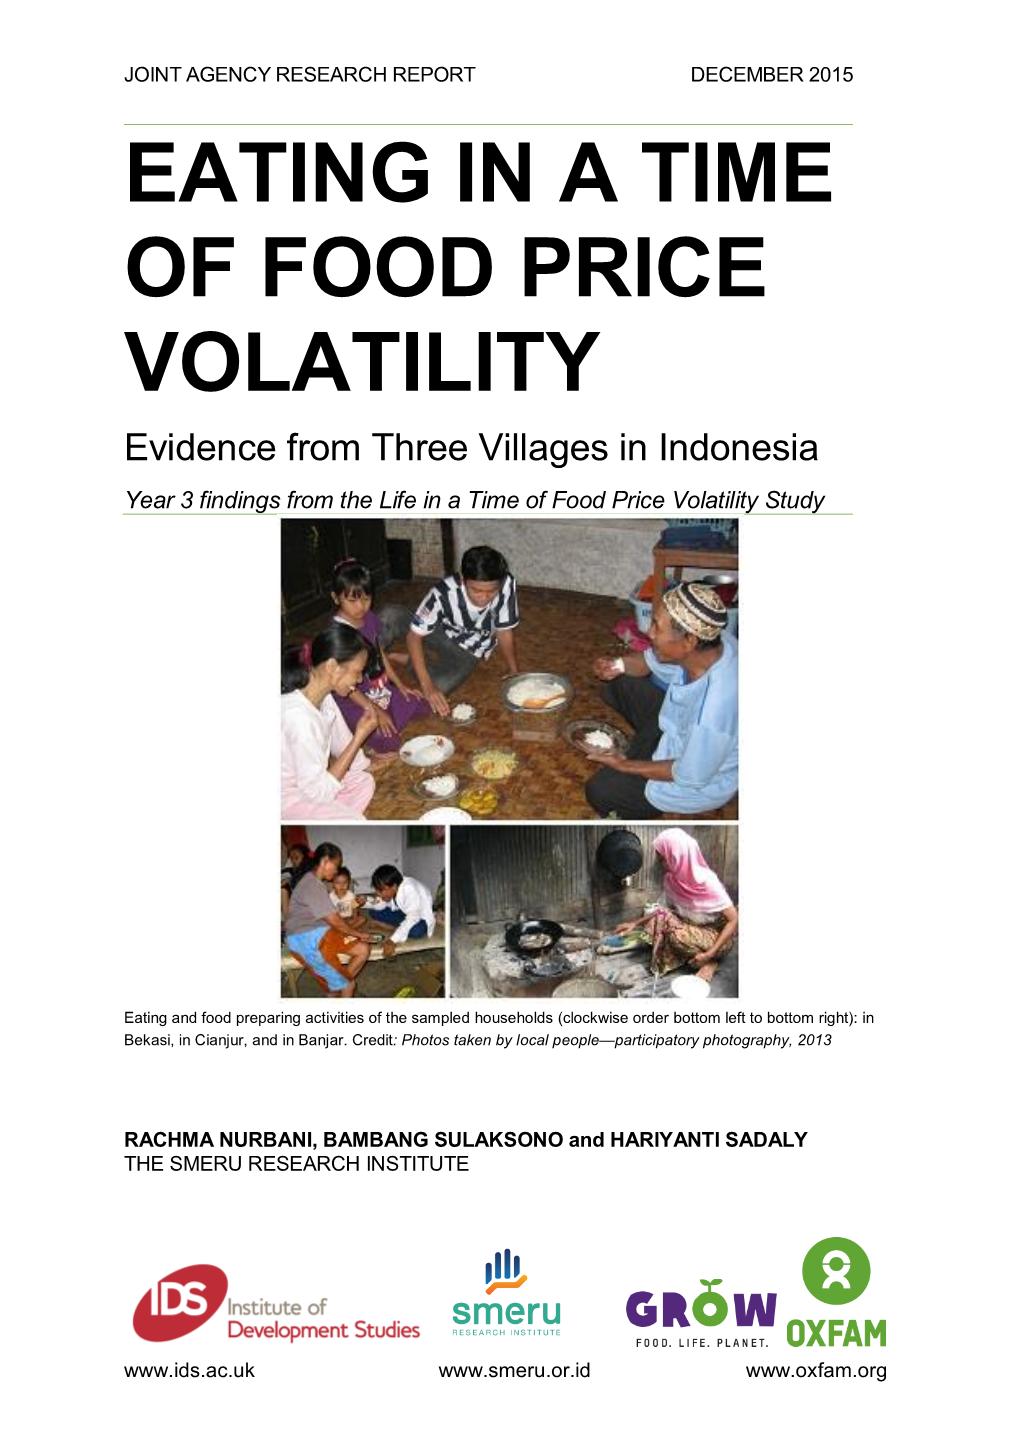 EATING in a TIME of FOOD PRICE VOLATILITY Evidence from Three Villages in Indonesia